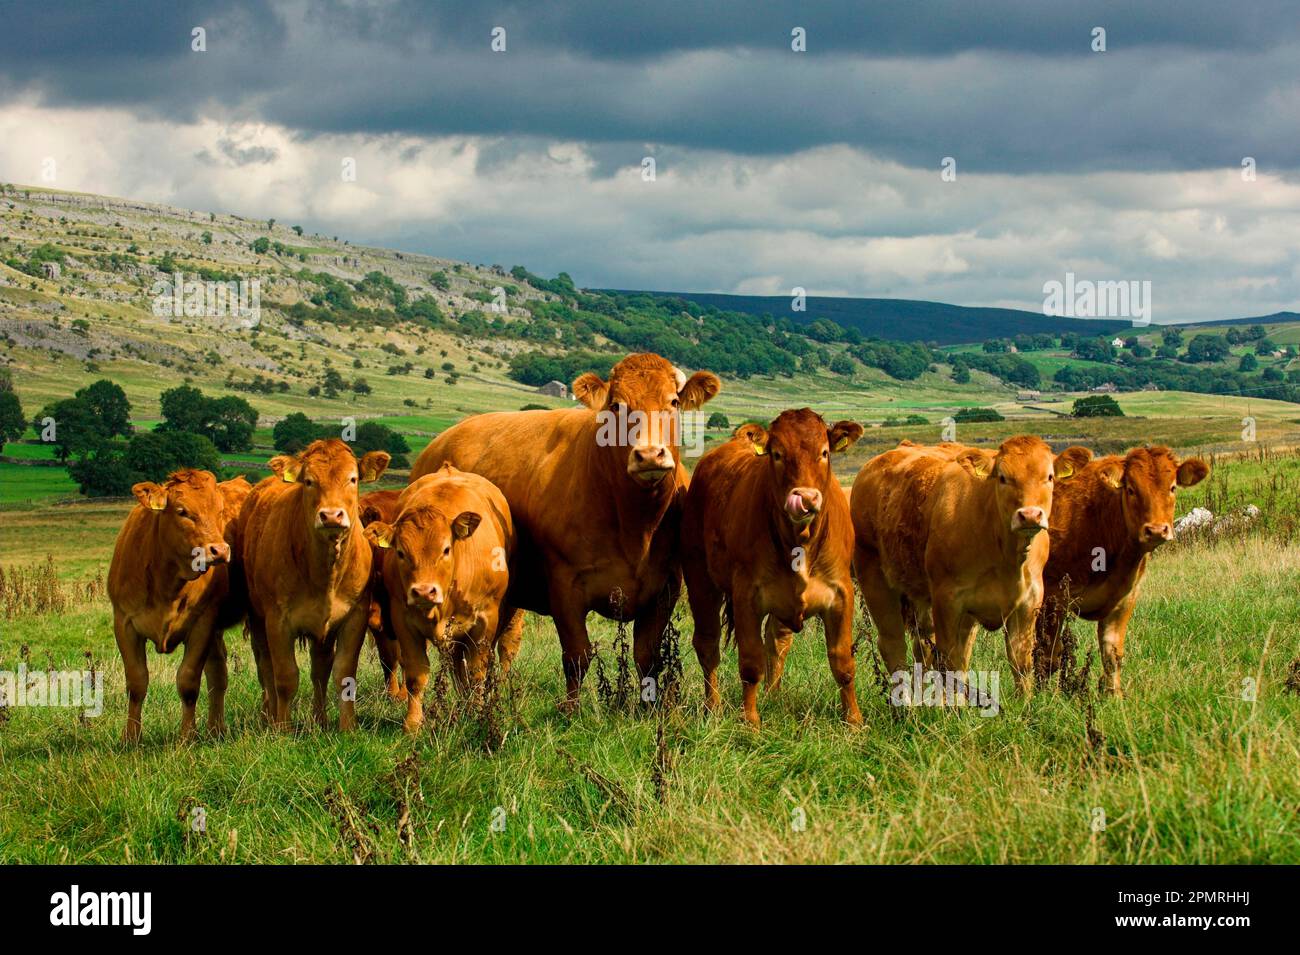 Domestic Cattle, Limousin cow and calves, standing in rough limestone pasture, England, United Kingdom Stock Photo